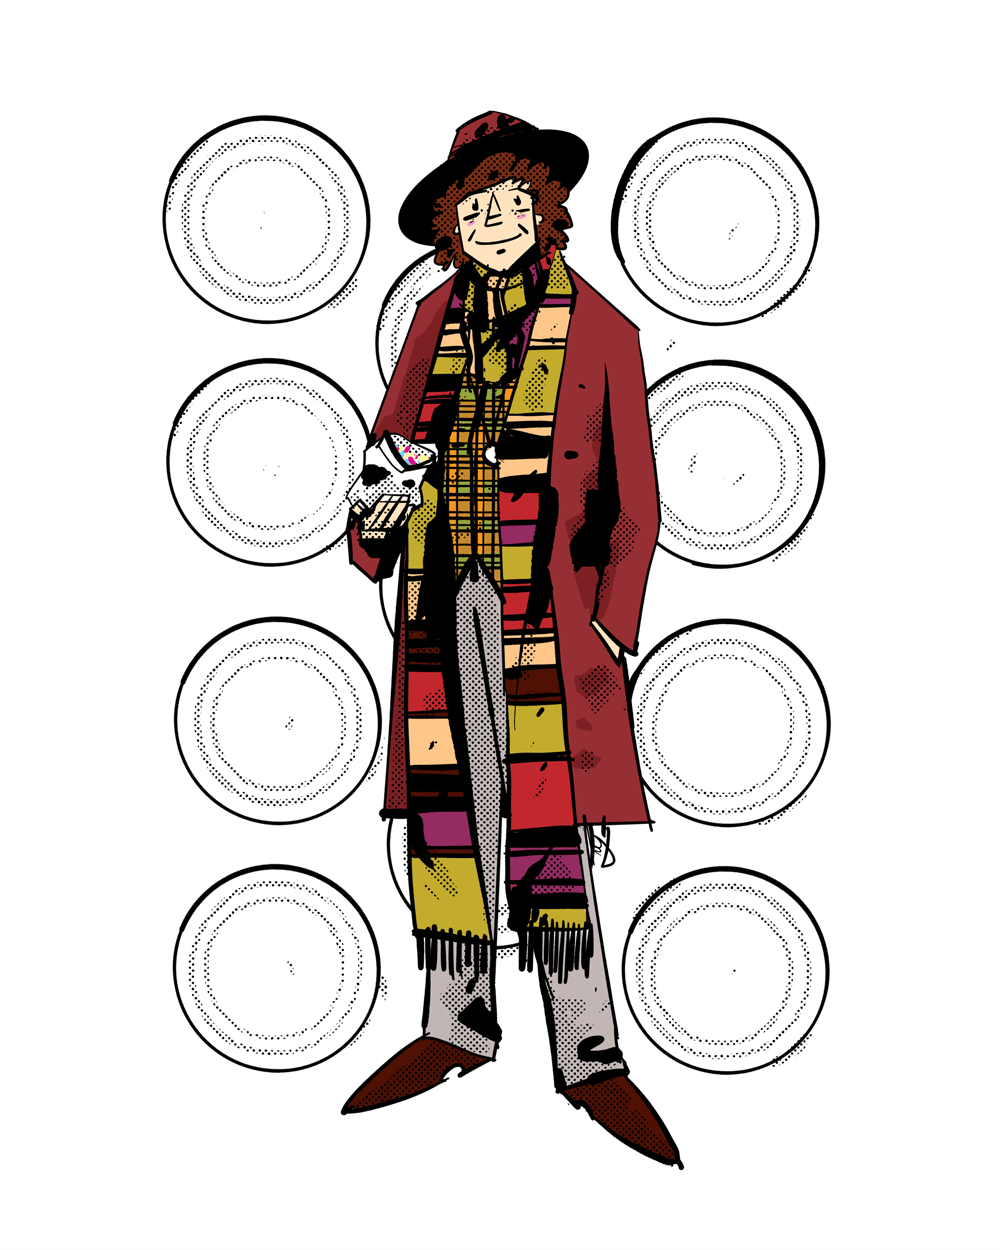 The Fourth Doctor Who, played by Tom Baker, smiling and eating jelly babies. He's wearing a wide, brimmed hat and a long striped scarf.